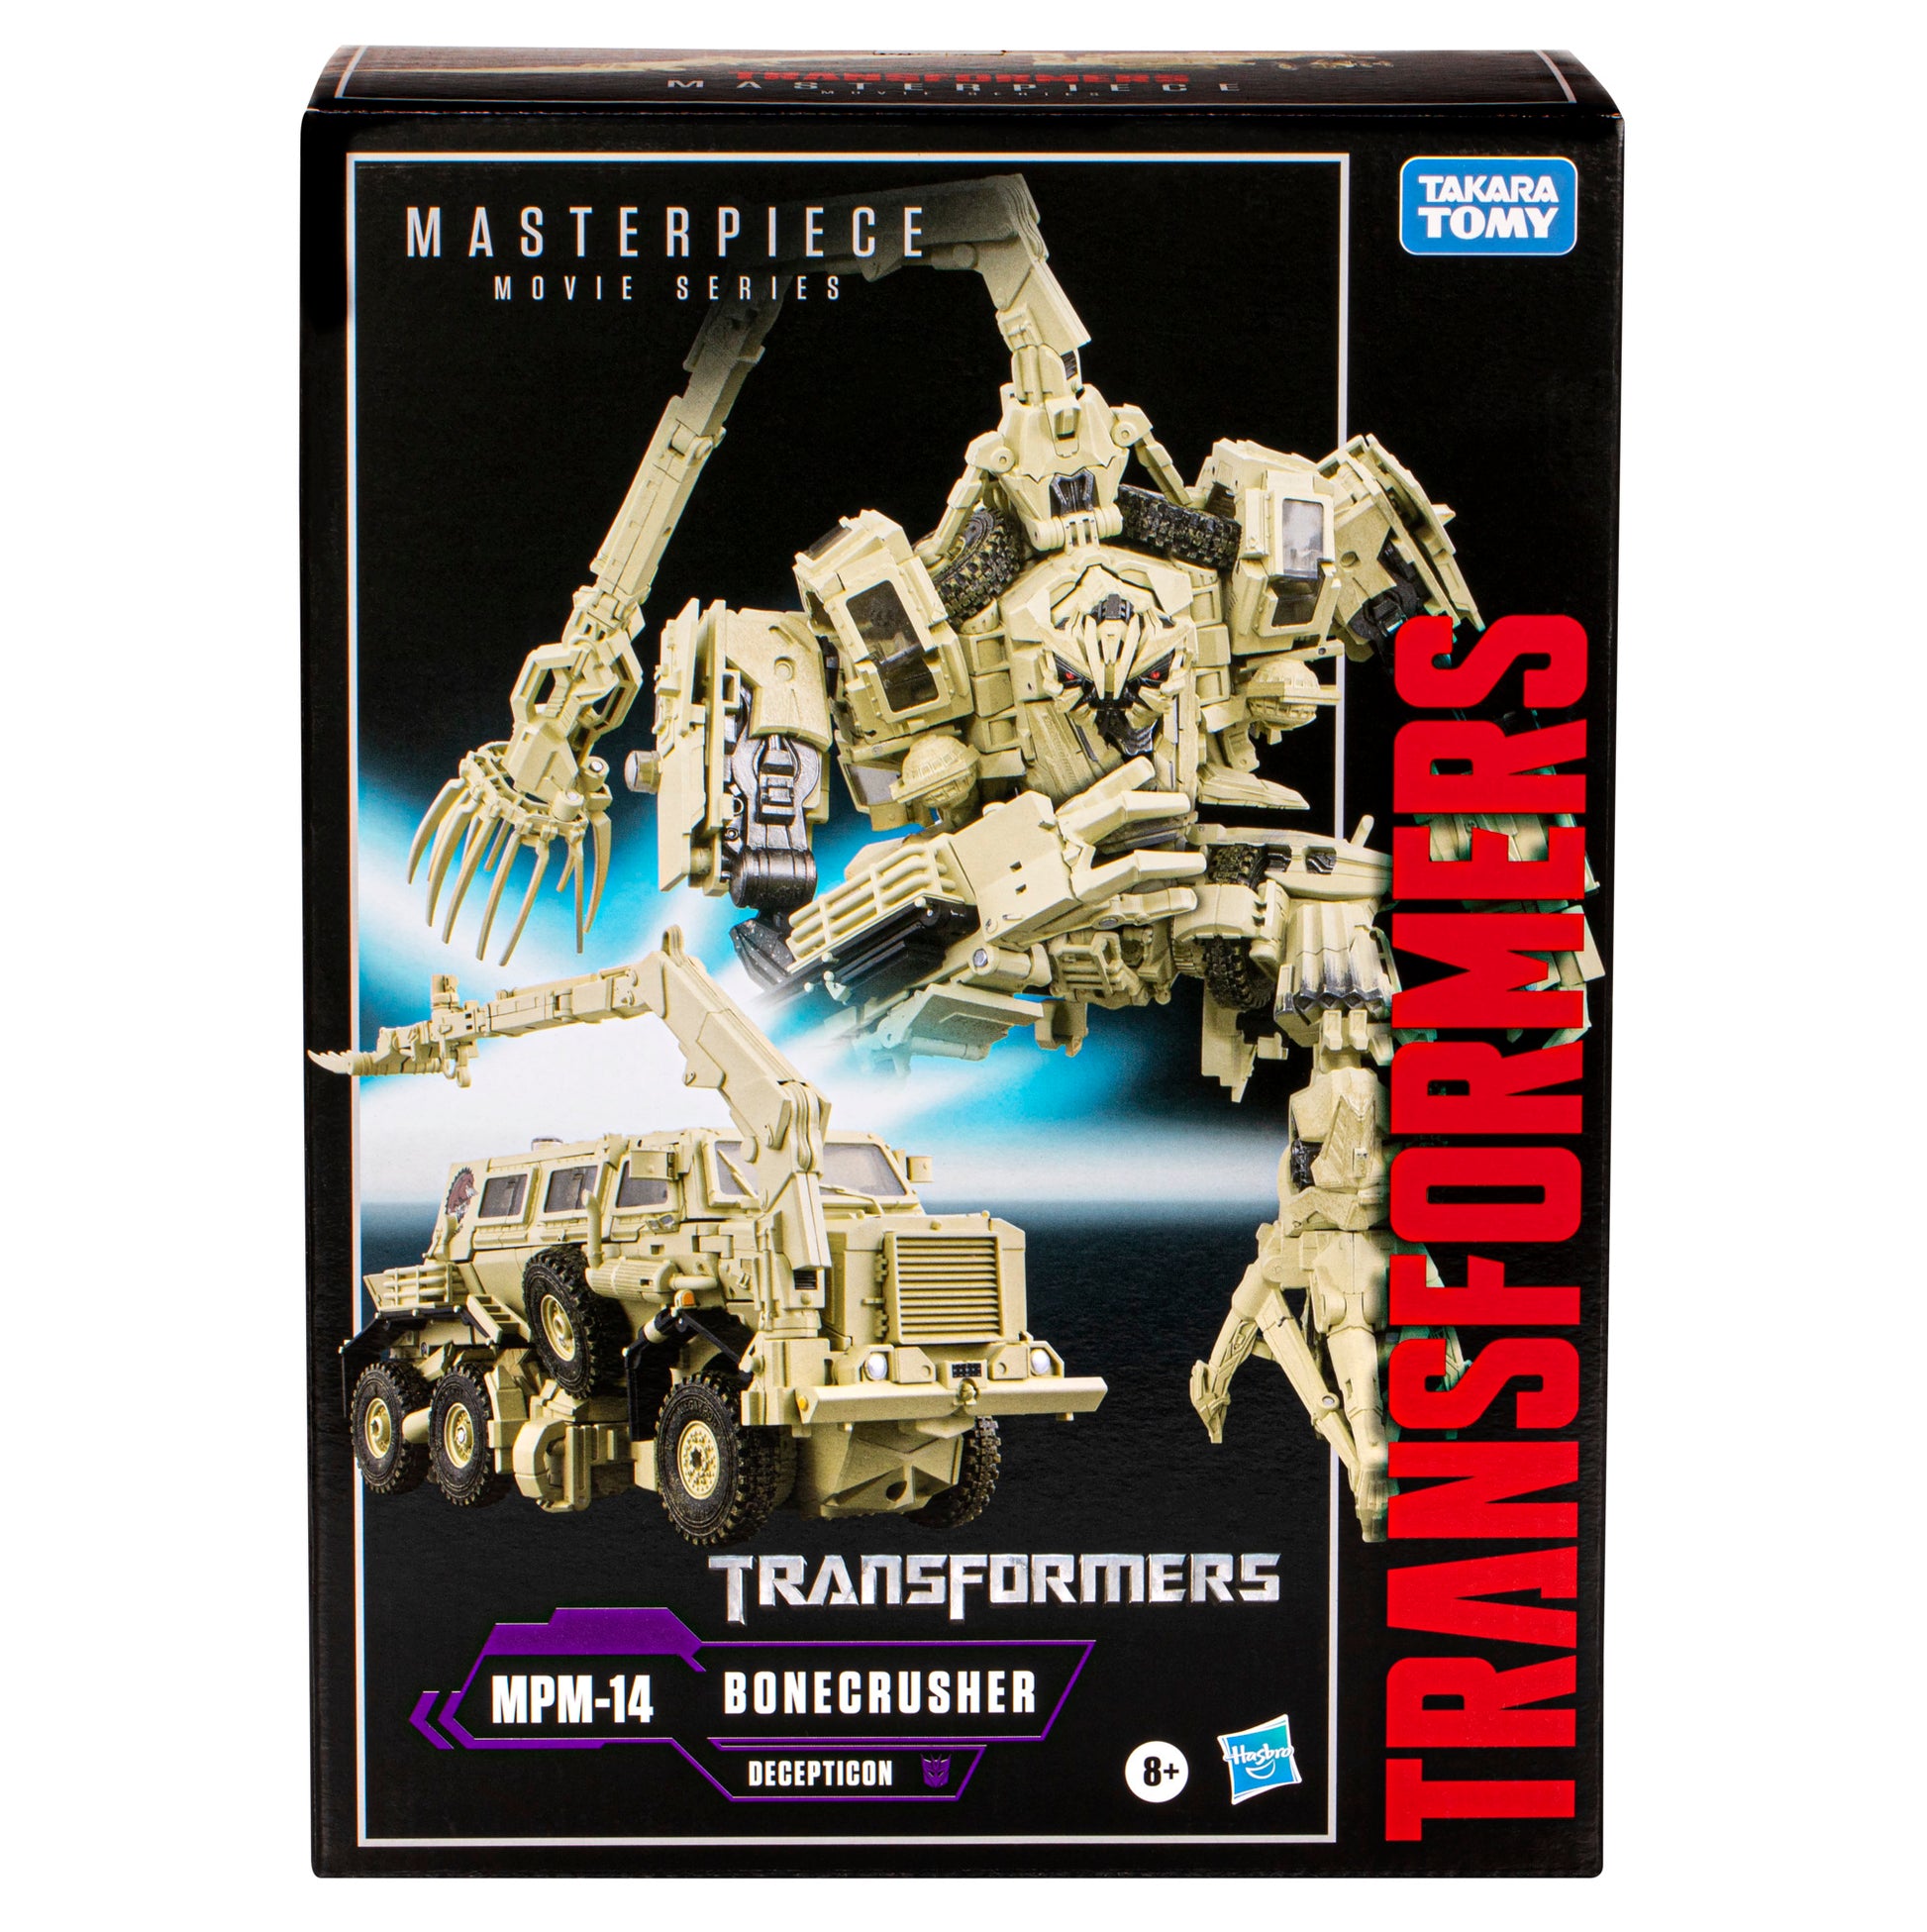 Masterpiece Series Transformers Movie 1 MPM-14 Bonecrusher Action Figure in a package - Heretoserveyou